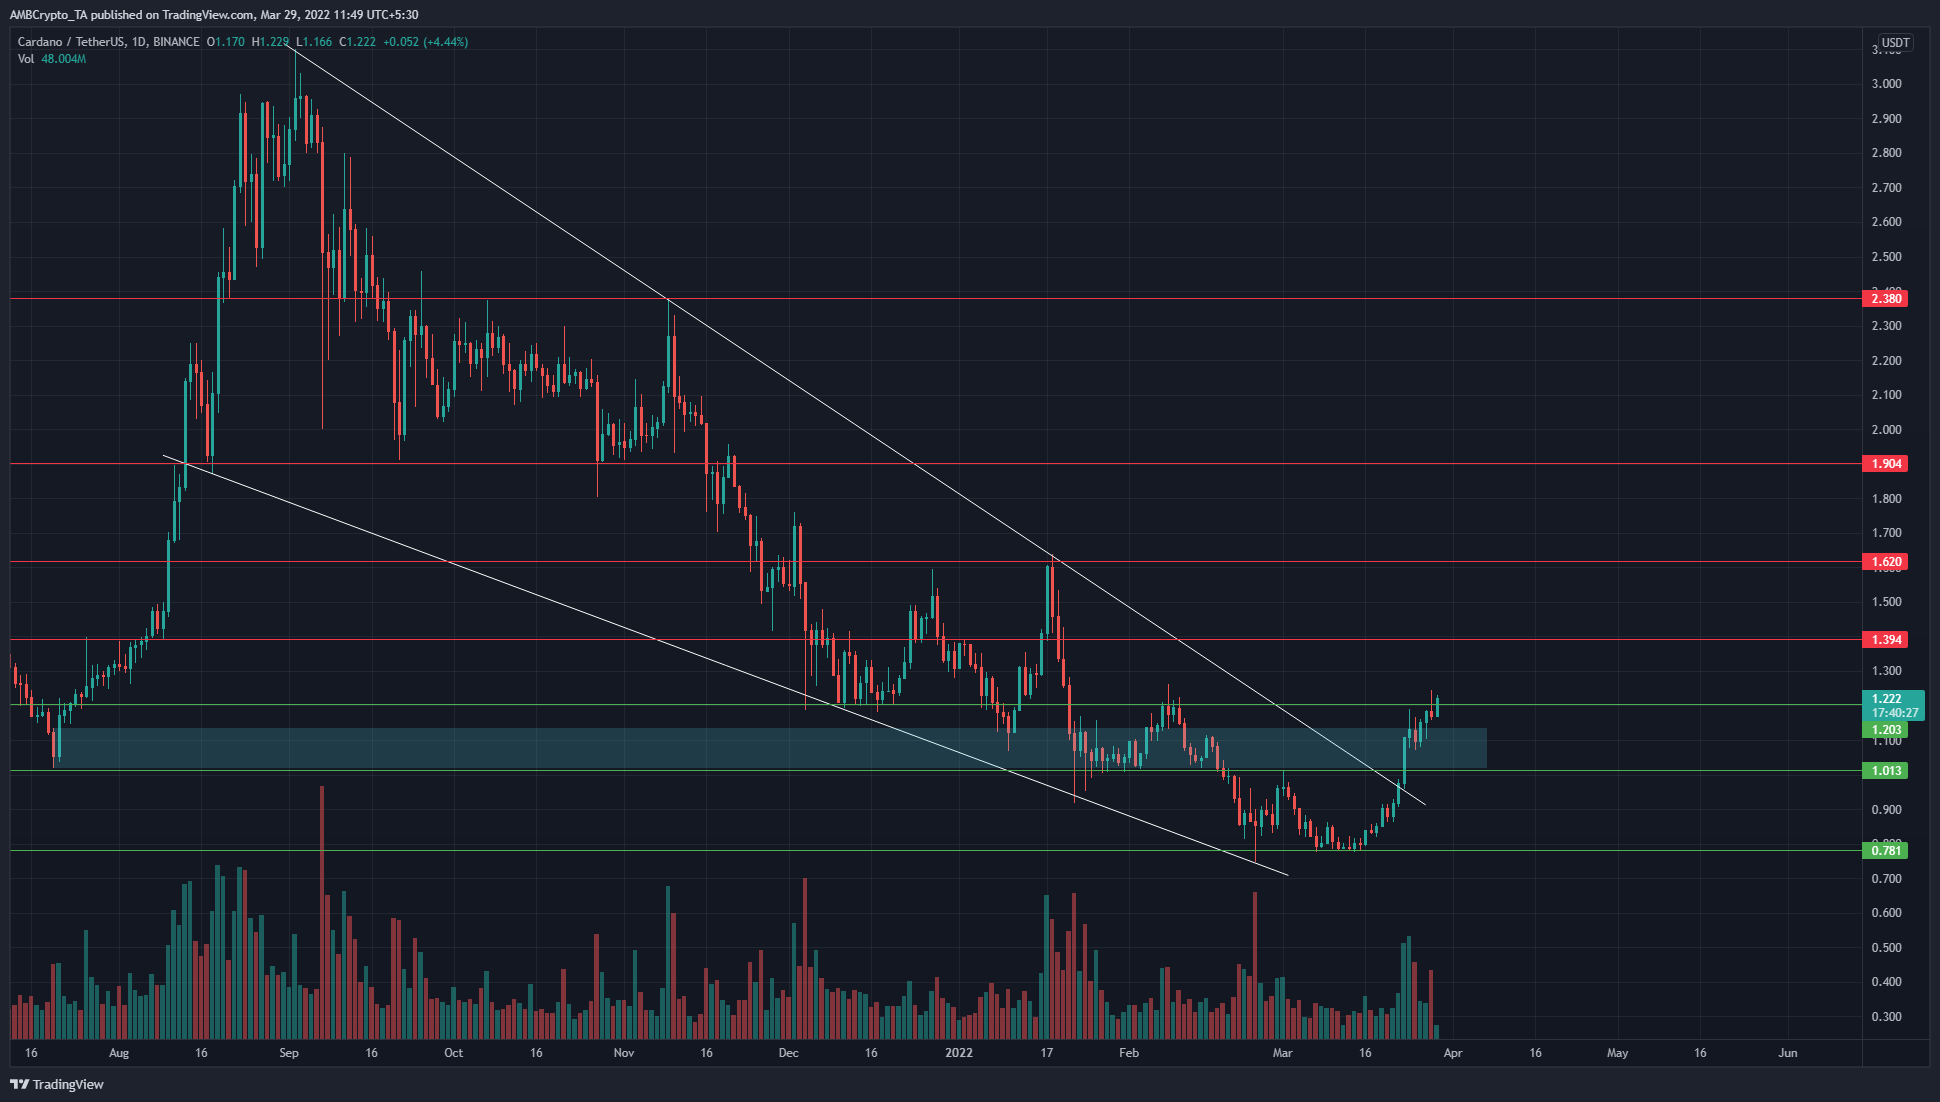 Cardano broke out of a bullish pattern and flipped a supply area to demand